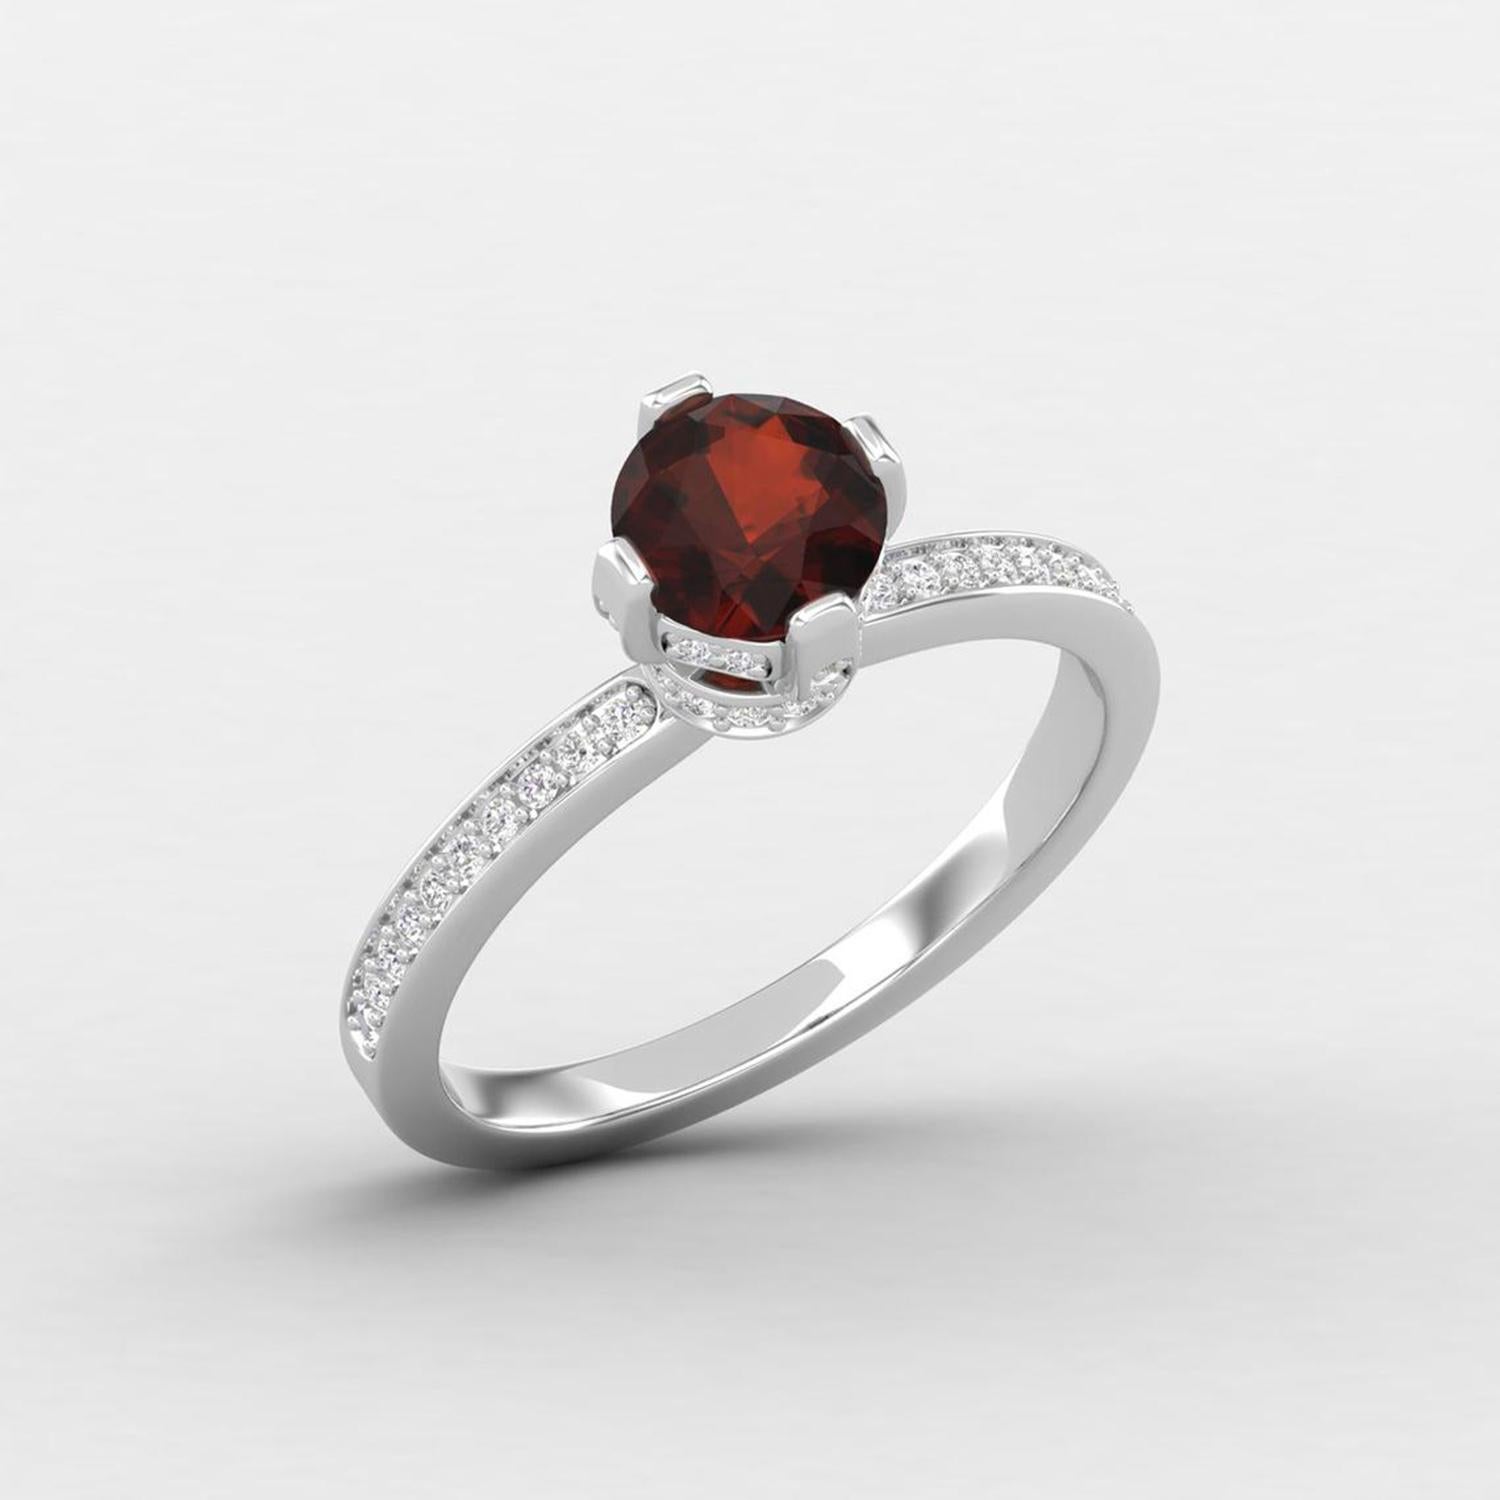 Round Cut 14 K Gold 6 MM Red Garnet Ring / 1 MM Diamond Solitaire Ring / Ring for Her For Sale